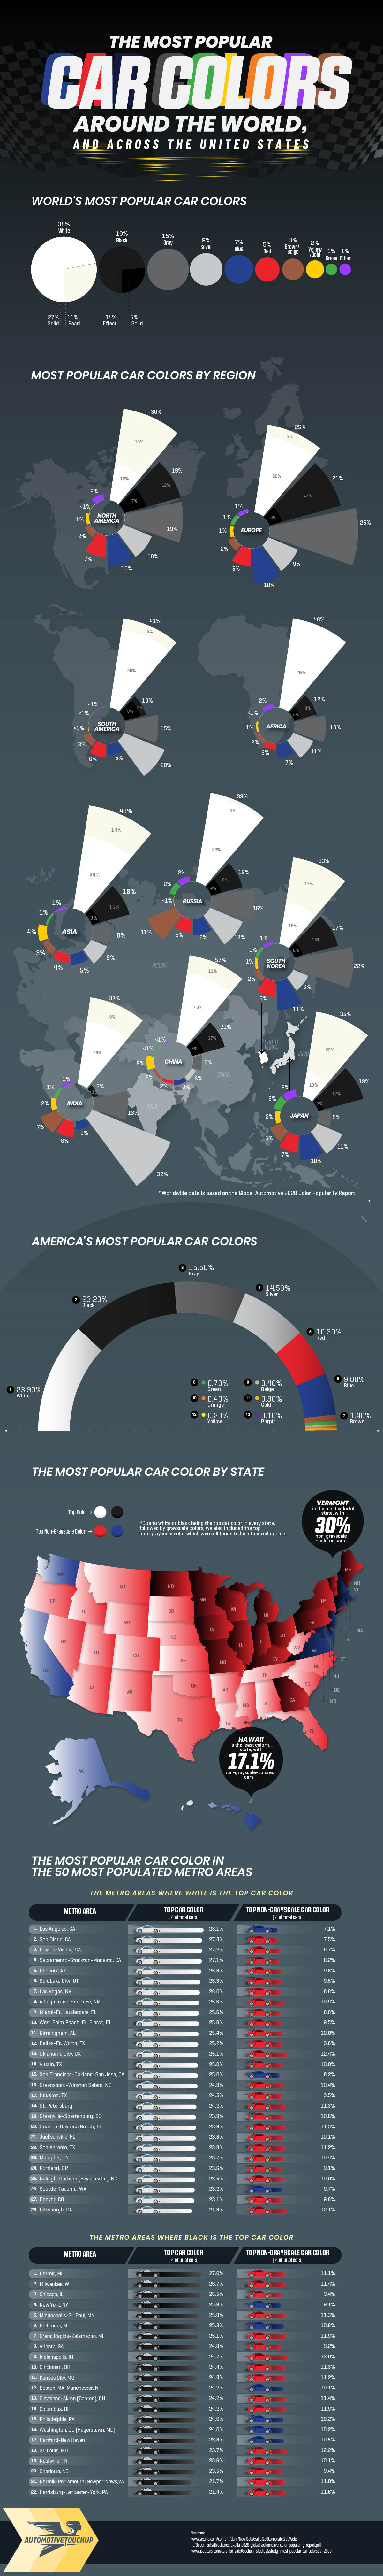 The Most Popular Car Colors Around the United States and the World